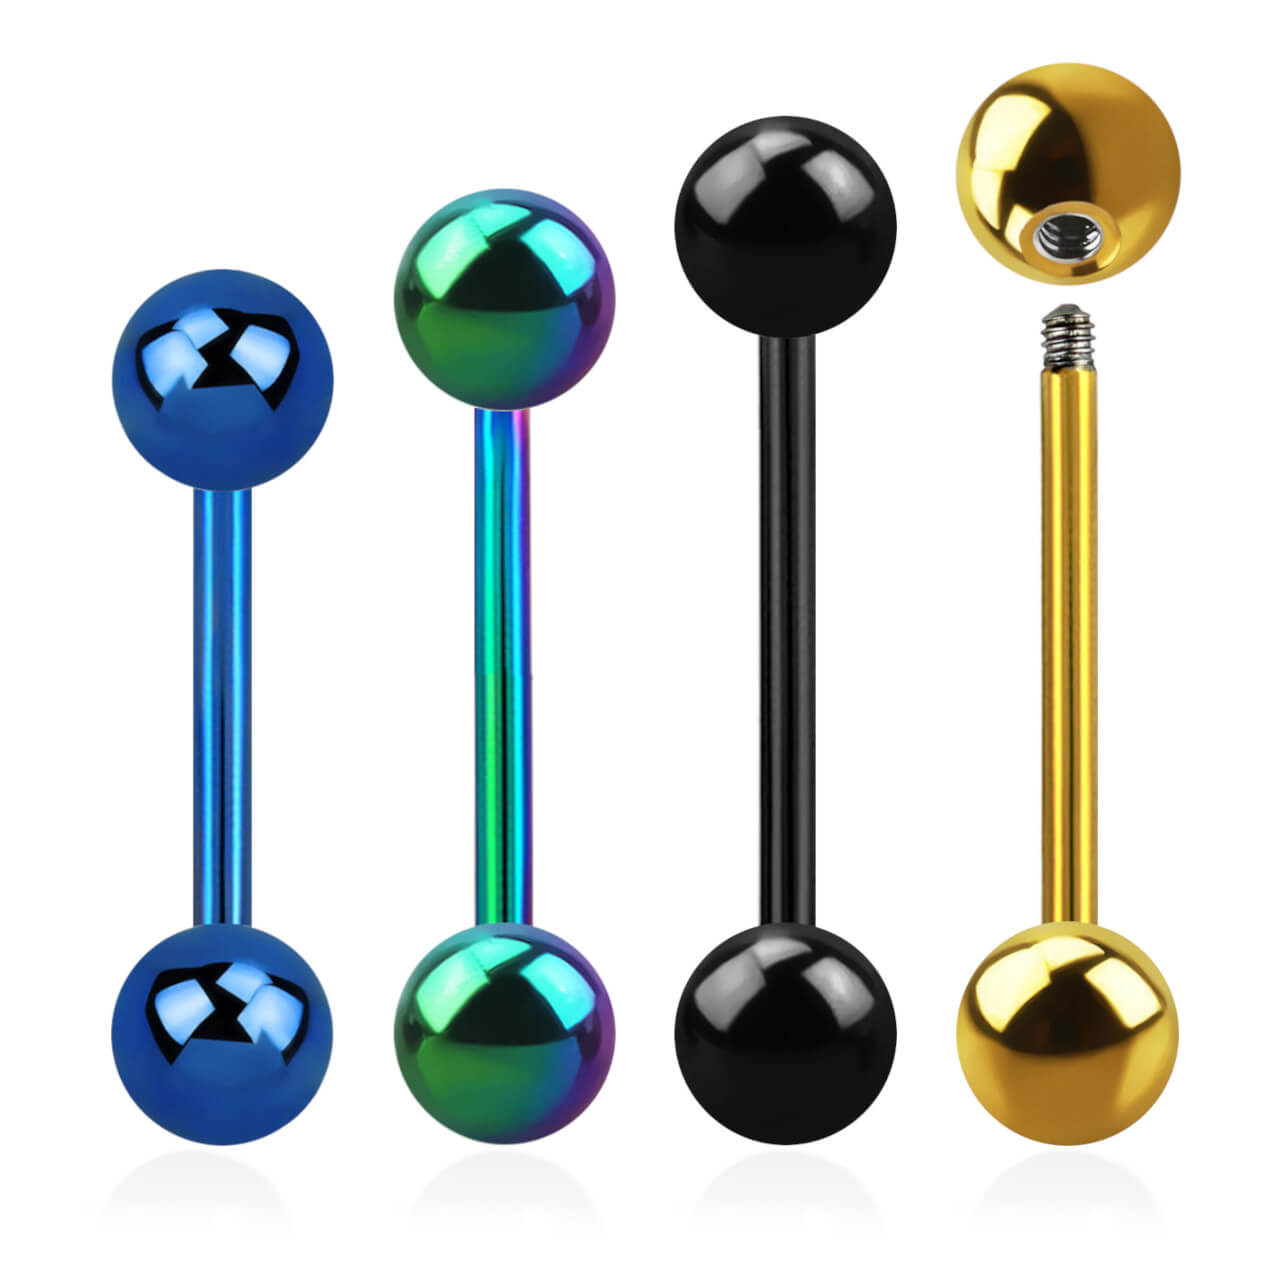 PBA16B6 Wholesale Assortment of 25 PVD plated 316L steel tongue barbells, Thickness 1.6mm, Ball size 6mm